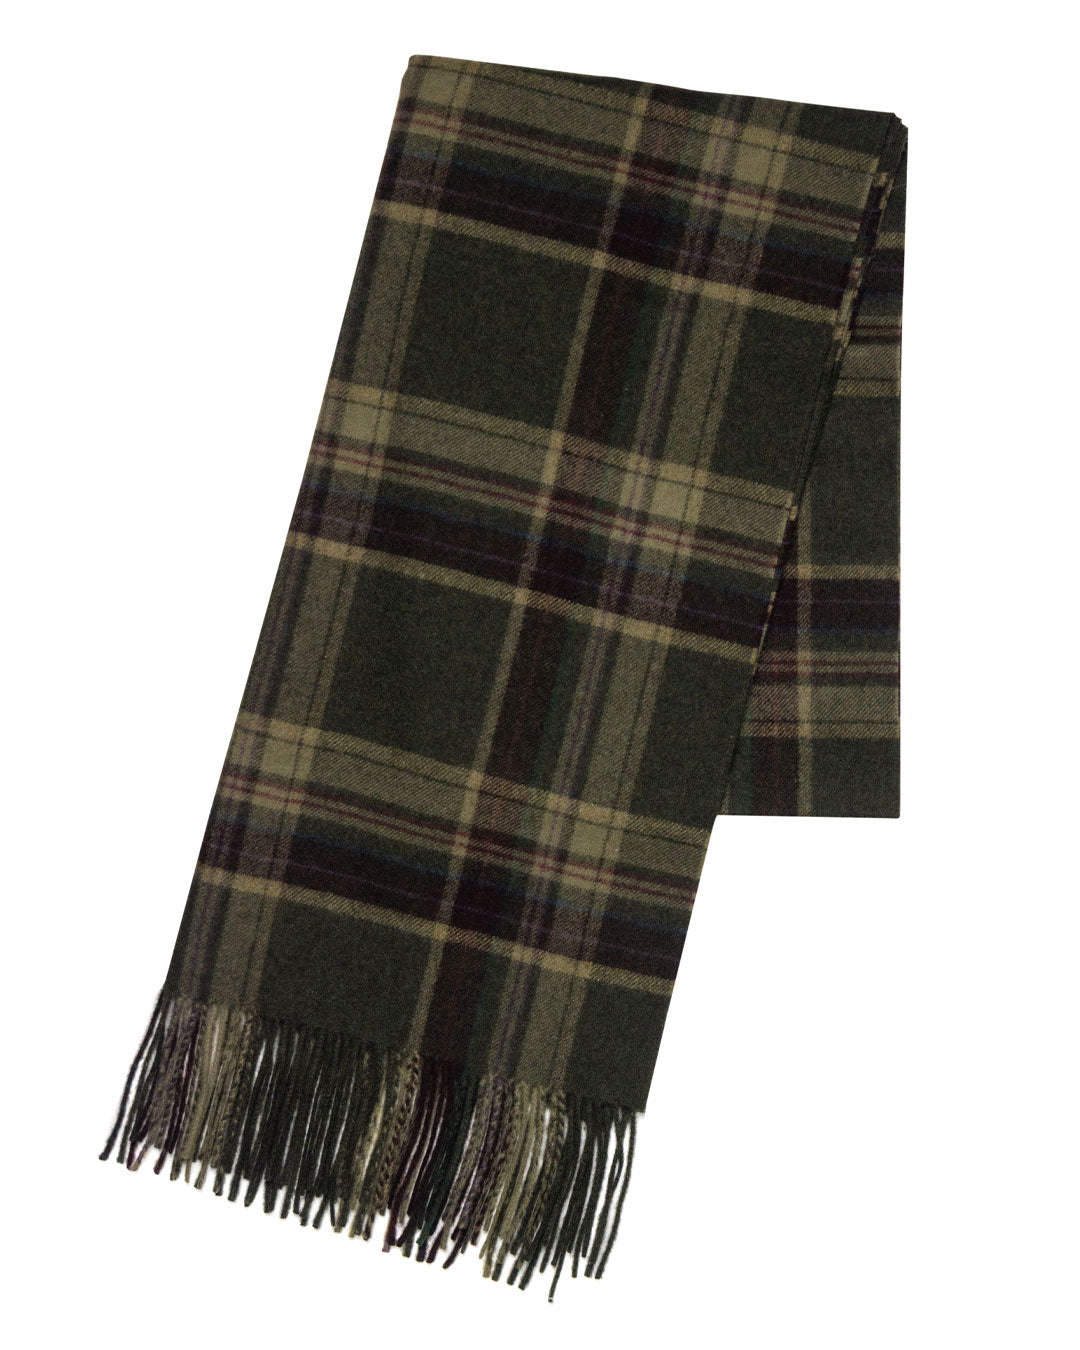 Joshua Ellis Featherweight Classic Check 100% Cashmere  Scarf Natural